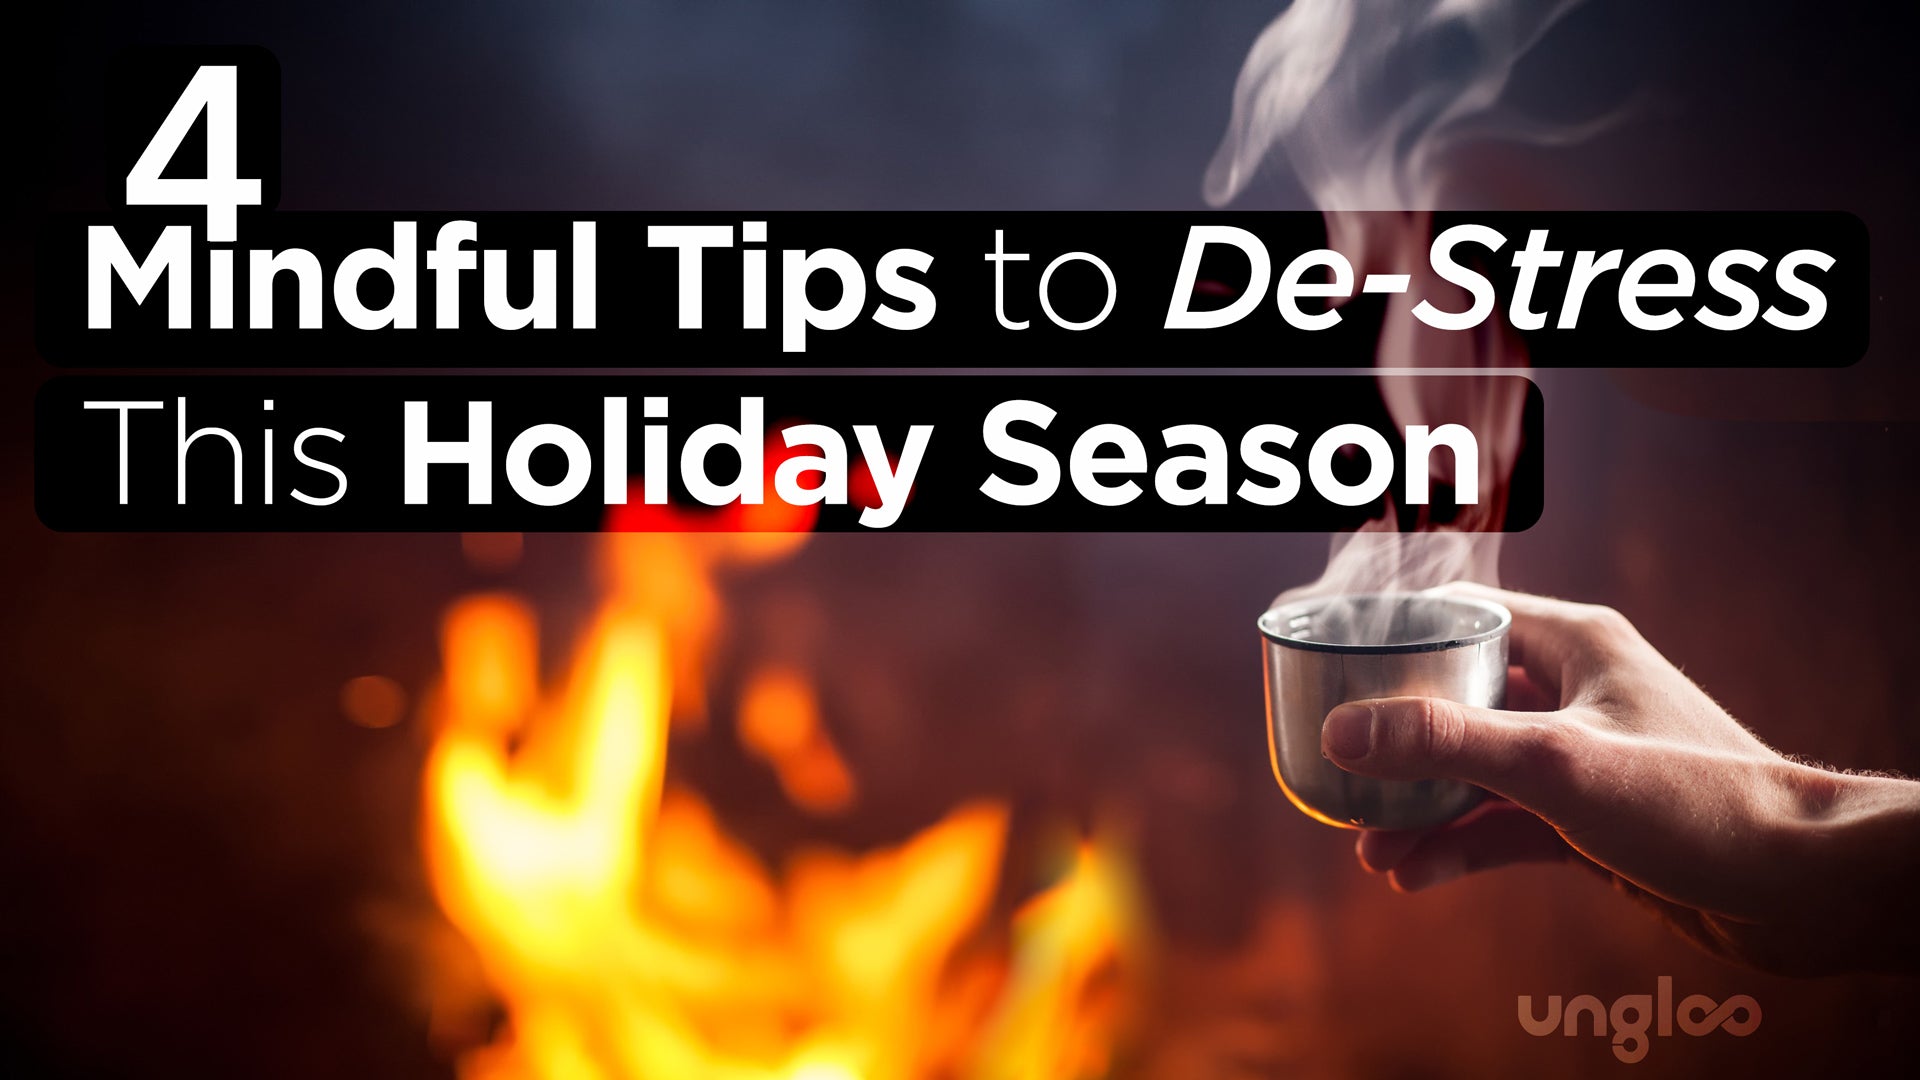 4 Mindful Tips to De-Stress This Holiday Season